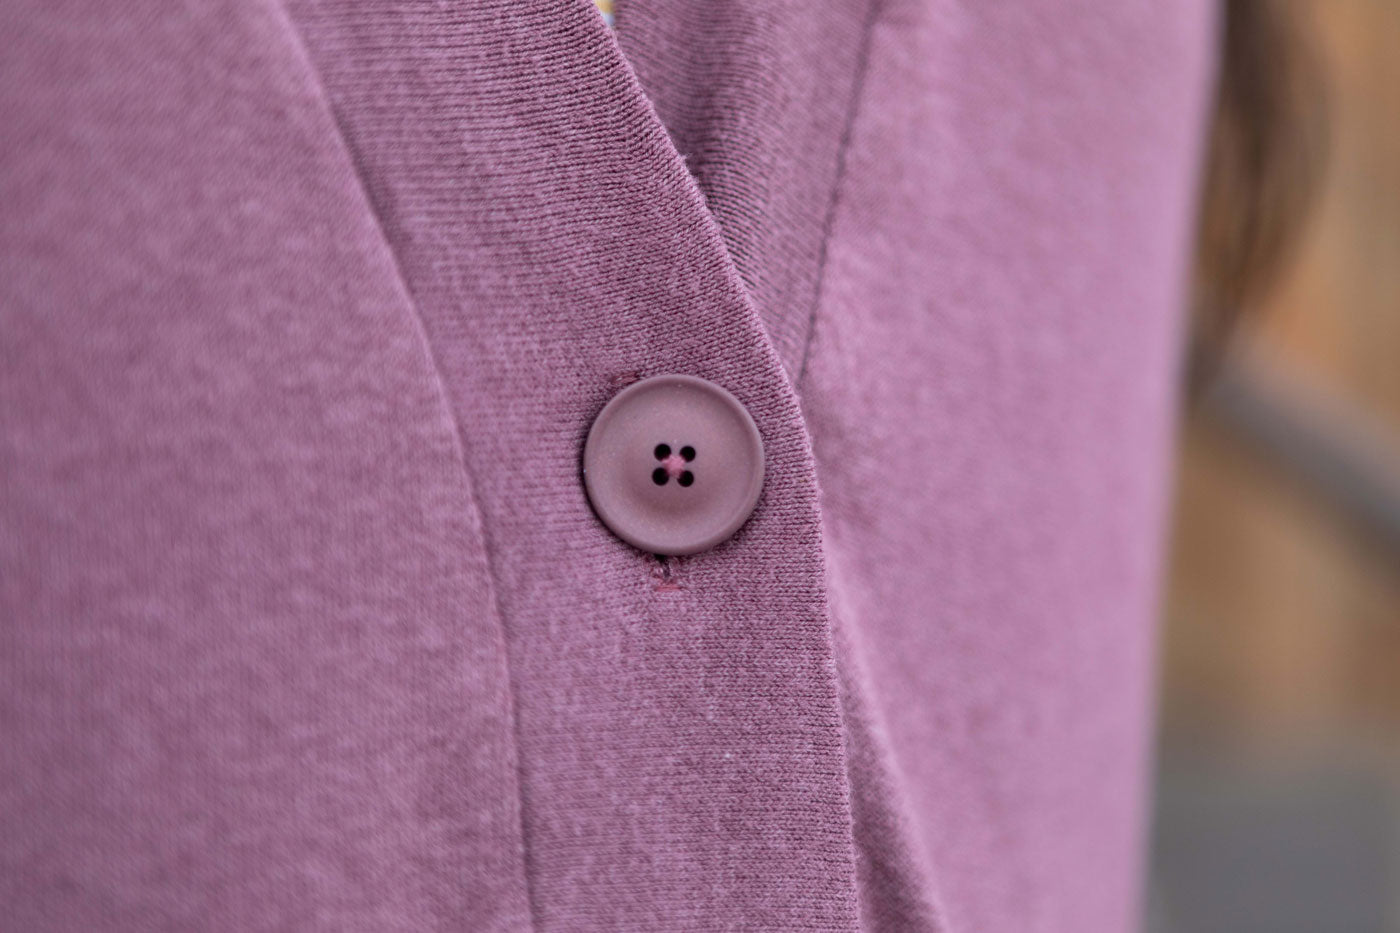 This is image of a close up on the Recycled Poly 25 mm button in Dusty Pink on Kim's cardigan